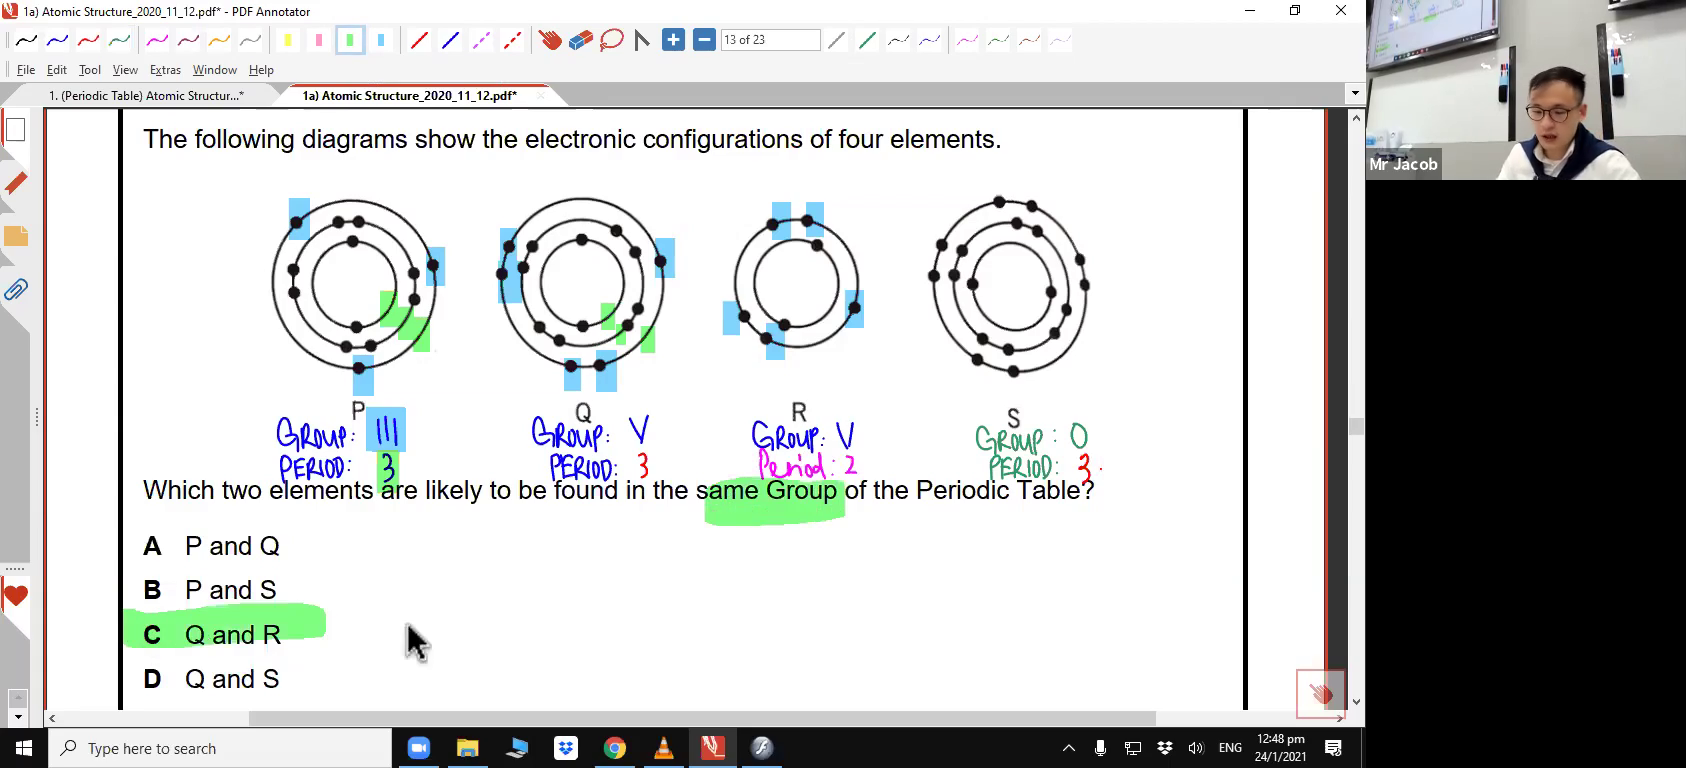 [ATOMIC STRUCTURE] Arrangement of Electrons & Noble Gases